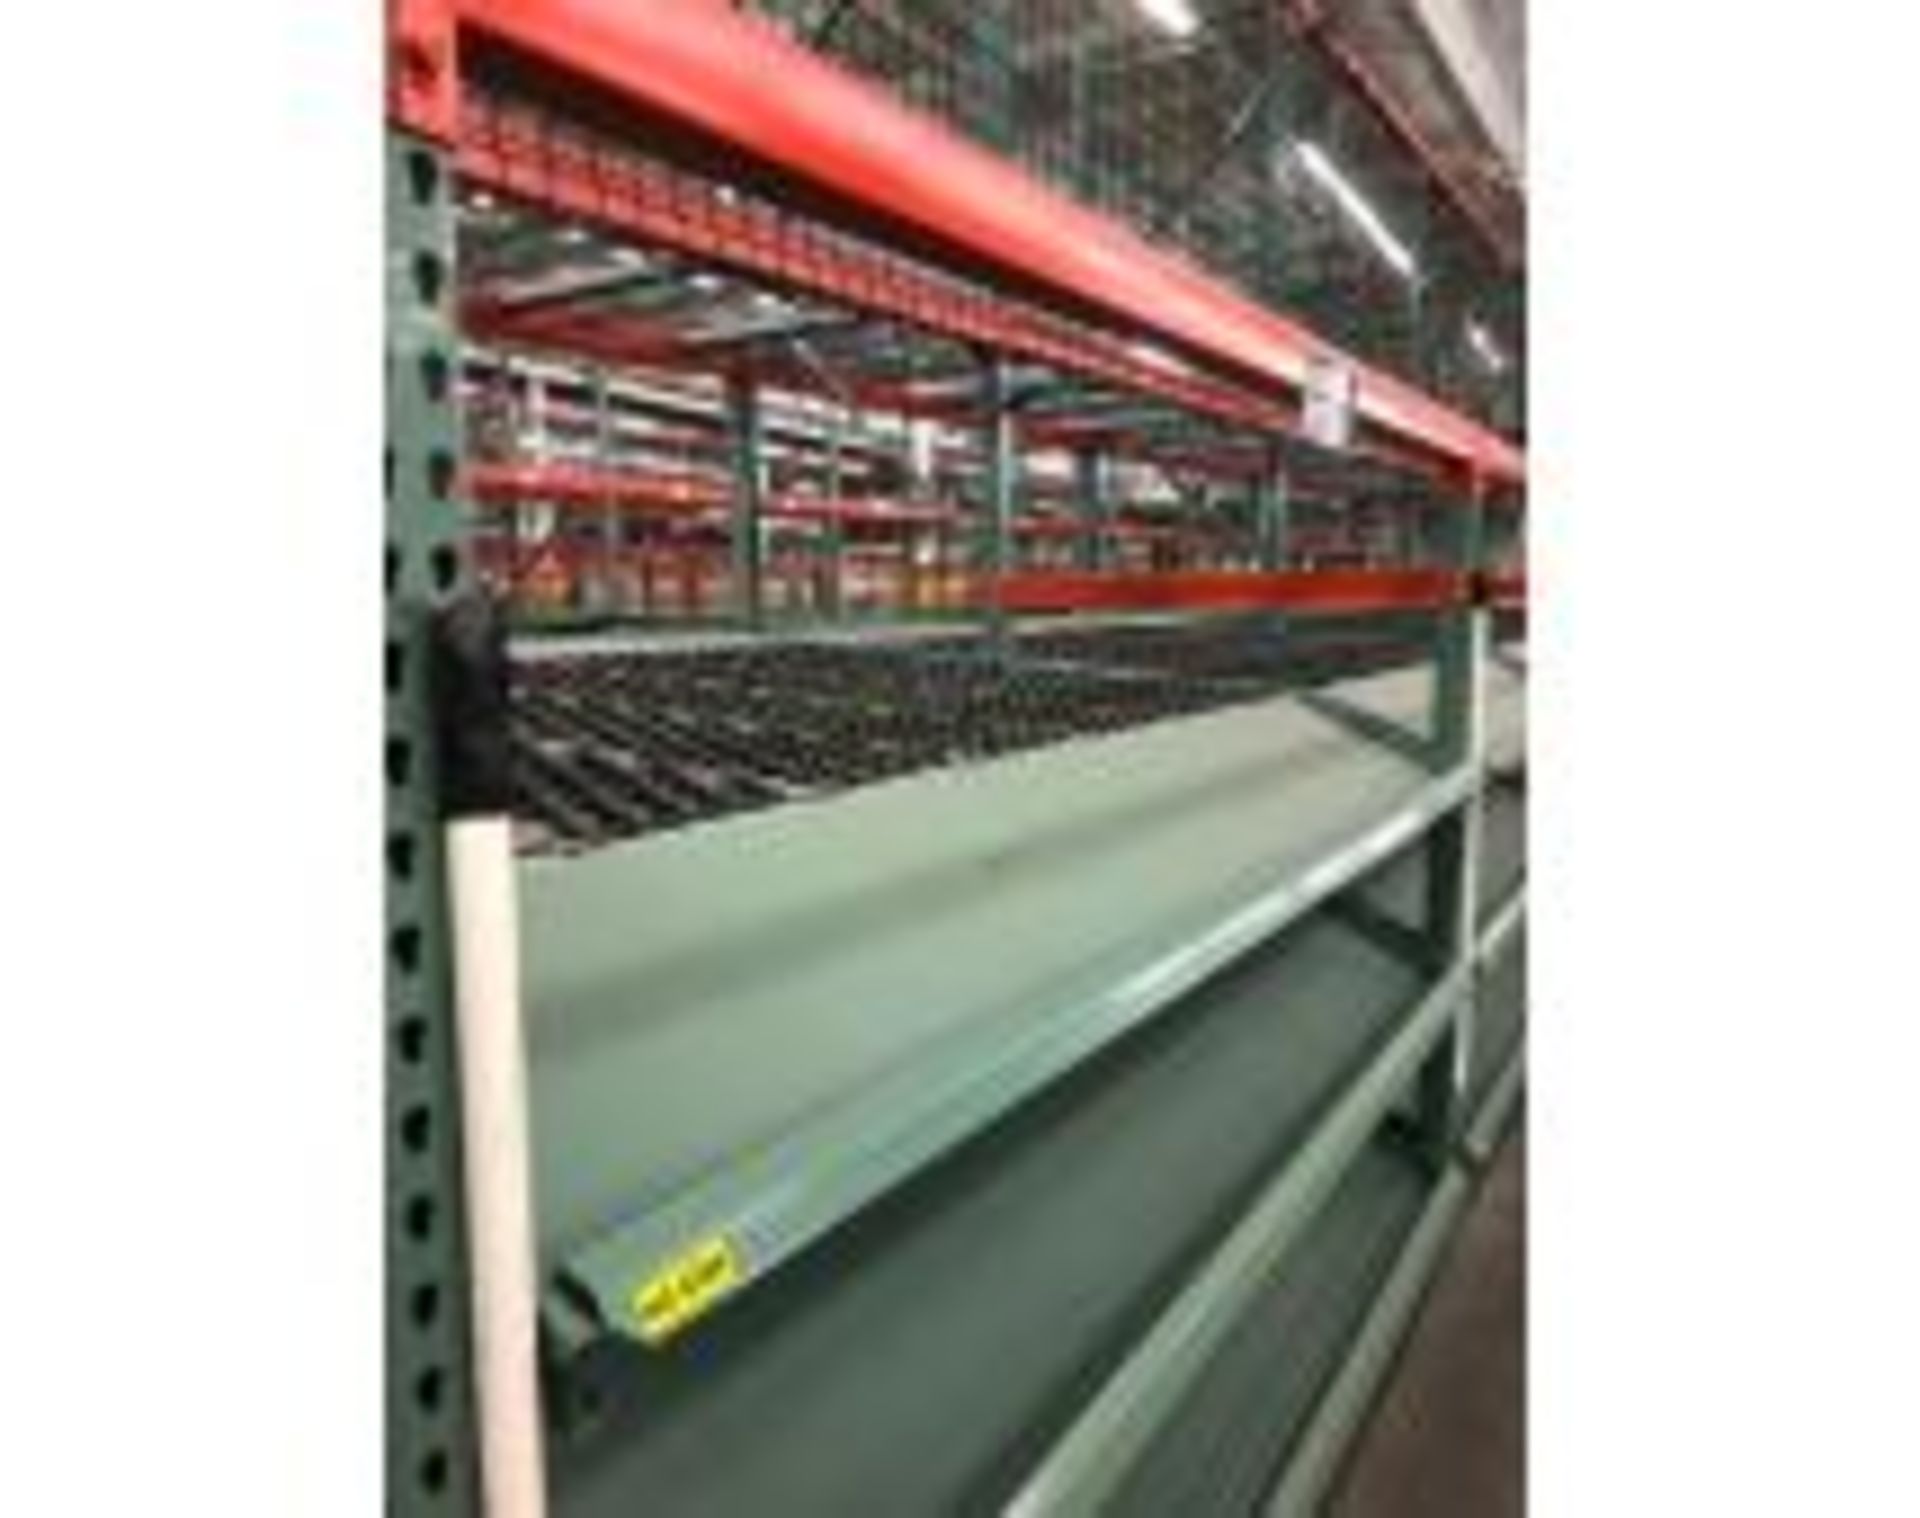 CARTON FLOW; (52) BAYS, 3-LEVELS PER BAY, BAY MEASURES 8' X 8' DEEP, INCLUDES ALL ROLLERS, IMPACT - Image 3 of 8